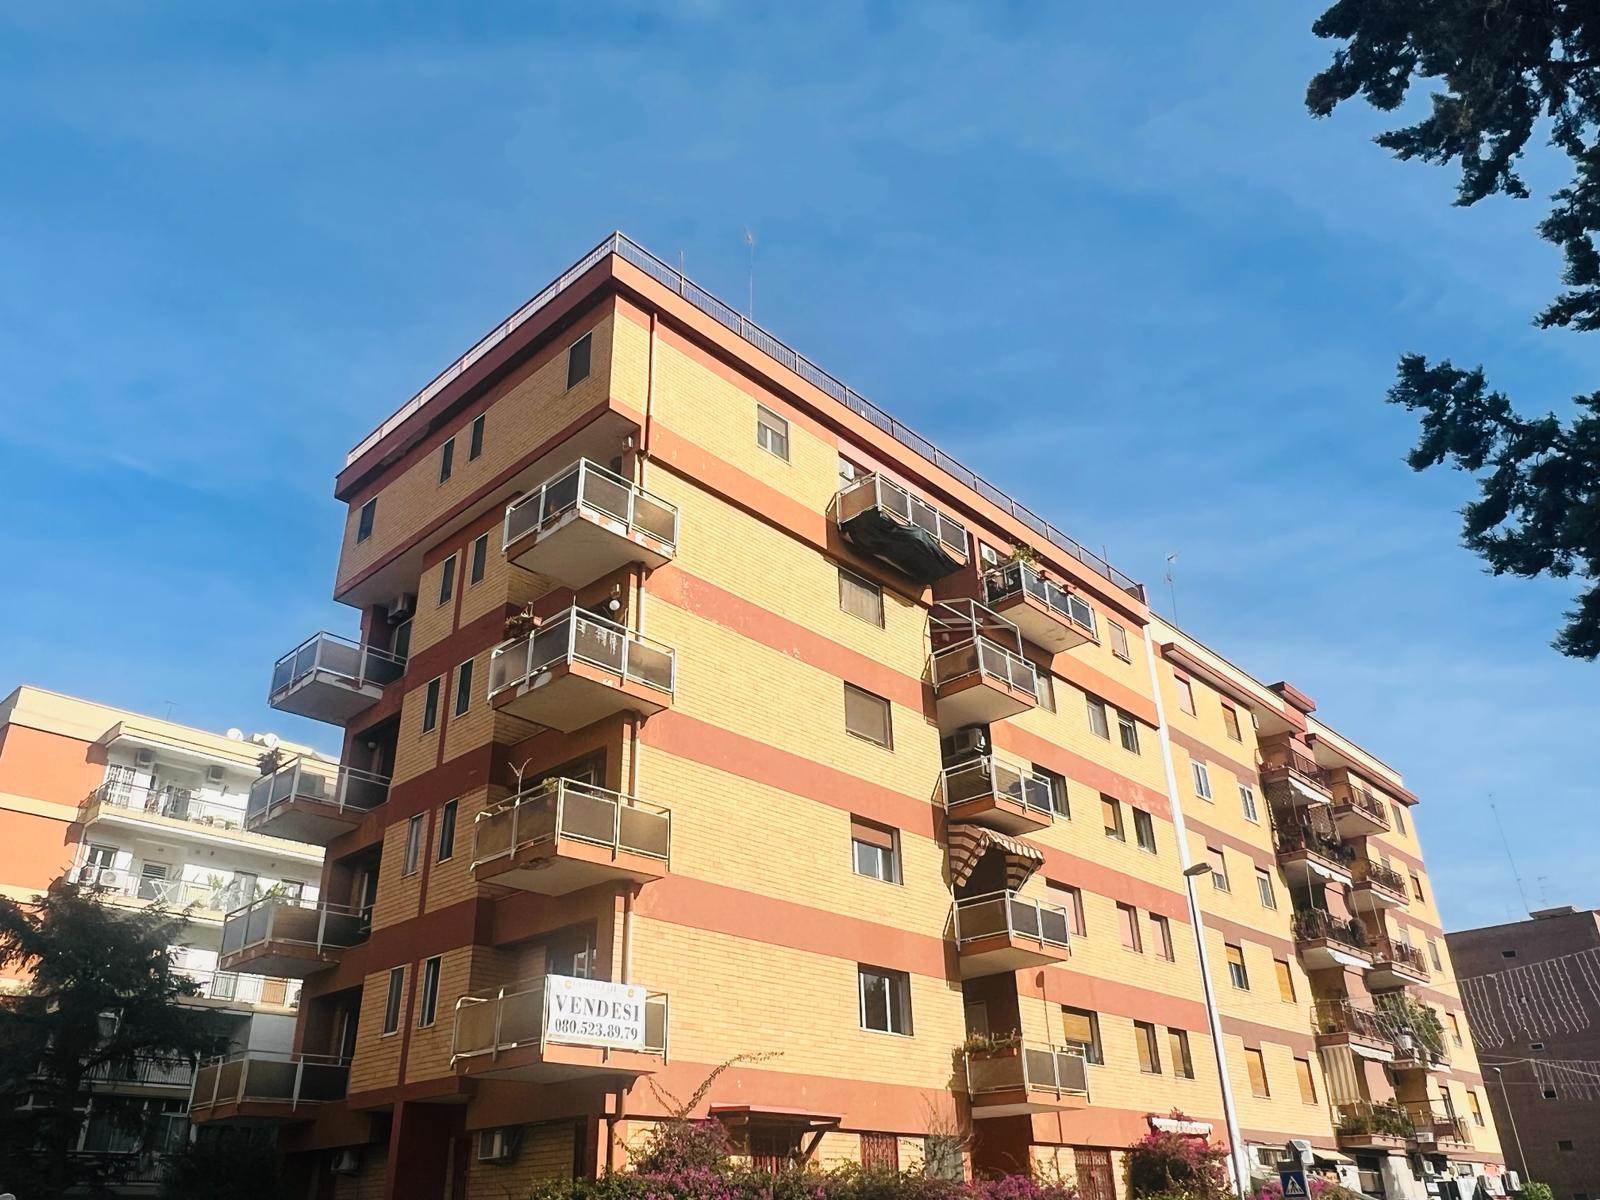 POGGIOFRANCO, BARI, Apartment for sale of 120 Sq. mt., Be restored, Heating Centralized, placed at 1°, composed by: 4 Rooms, Separate kitchen, , 2 Bedrooms, 2 Bathrooms, Parking space, Elevator, 